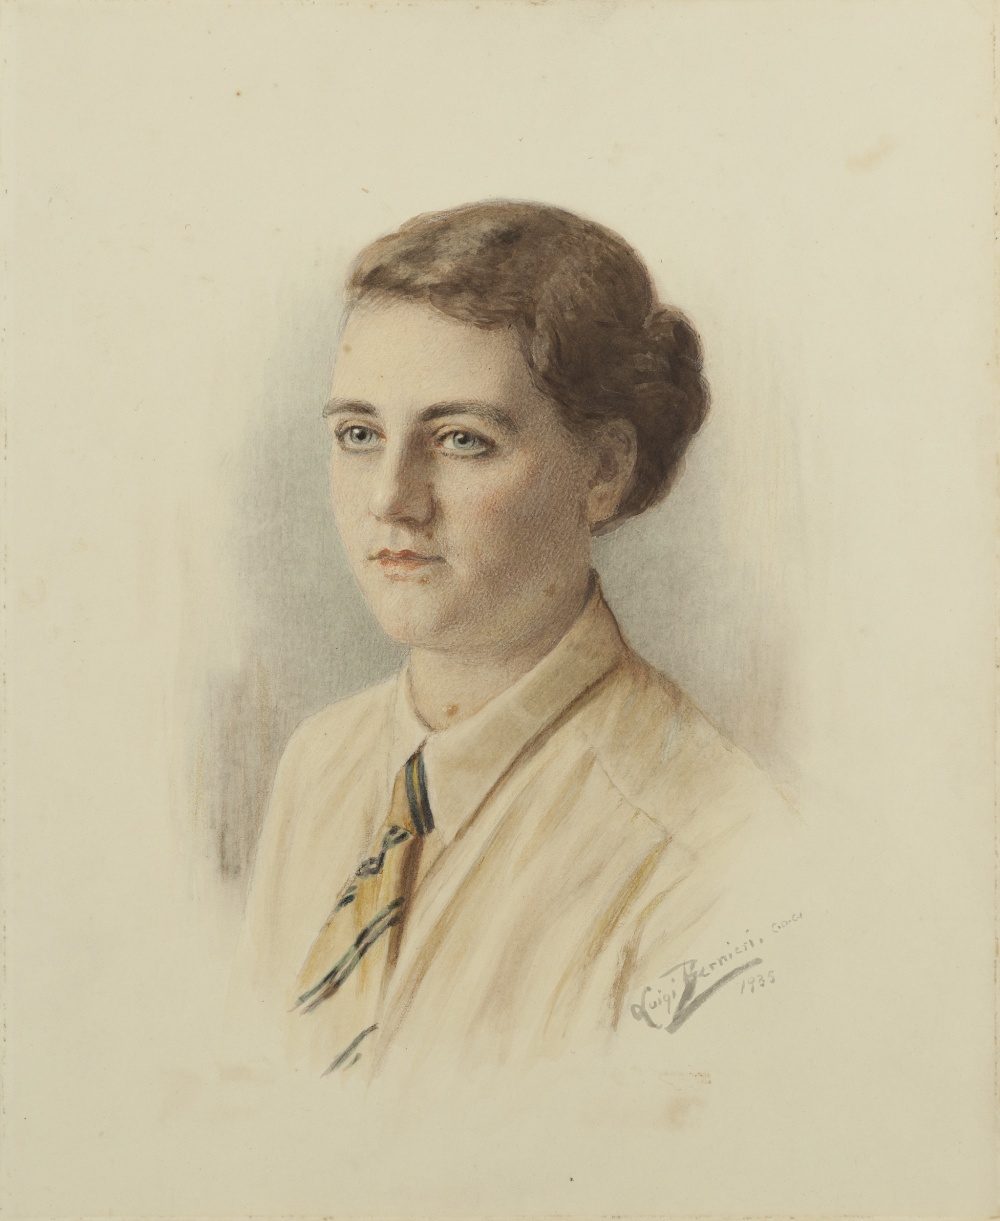 LUIGI BERNICII (?) WATERCOLOUR DRAWING AND PENCIL Seated school portrait Signed and dated 1935 lower